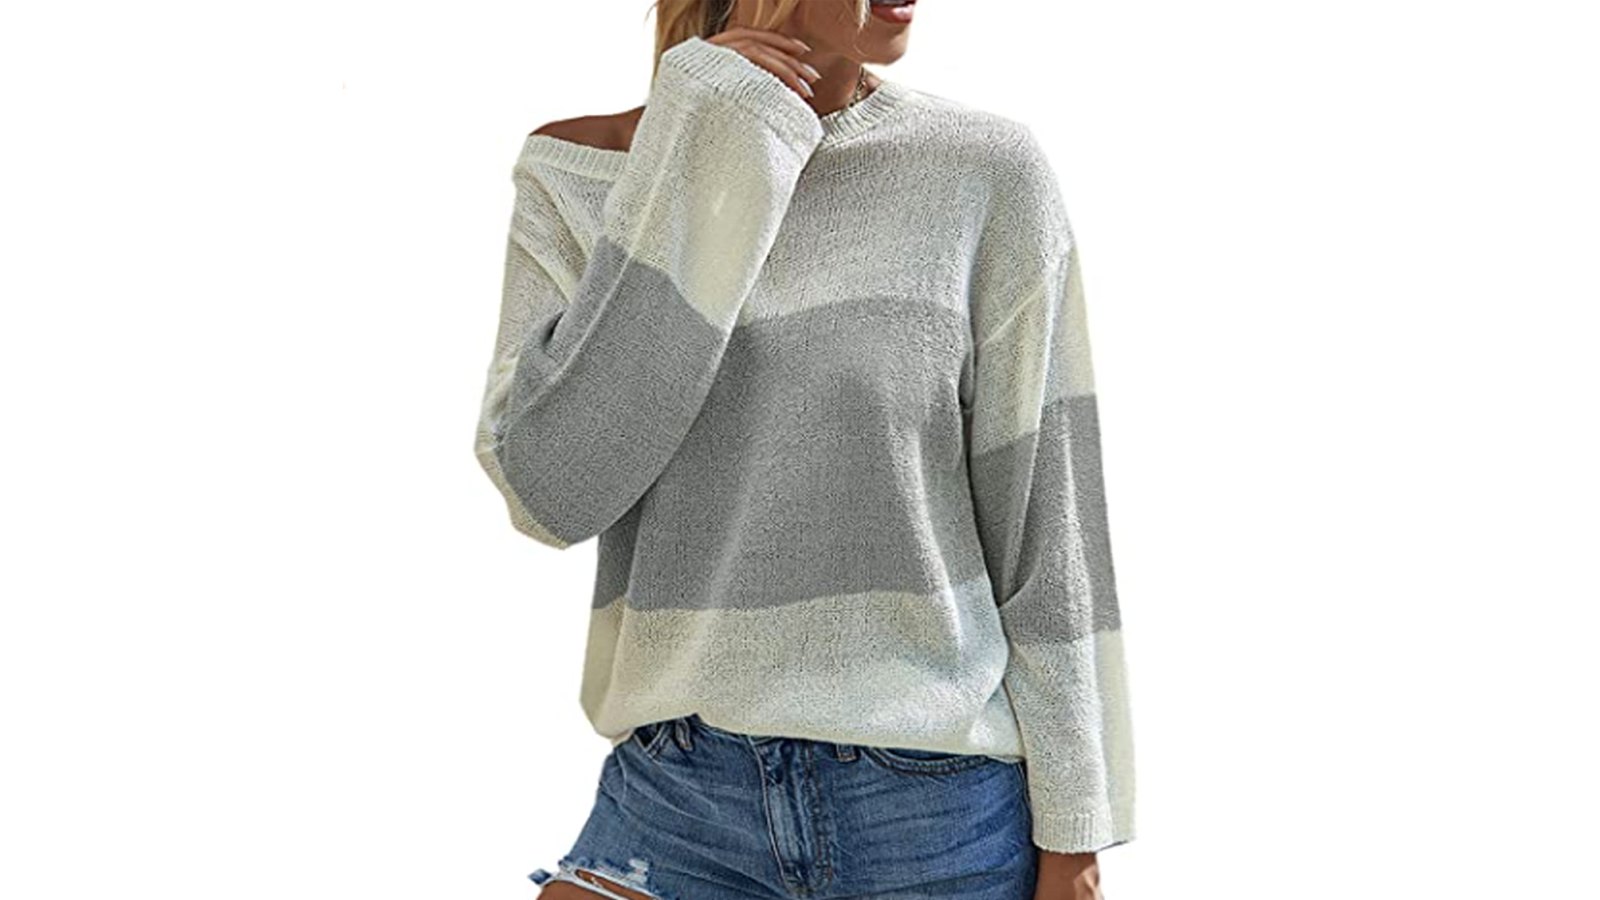 Angashion Loose Knit Sweater Is the Perfect Fall Pullover | UsWeekly